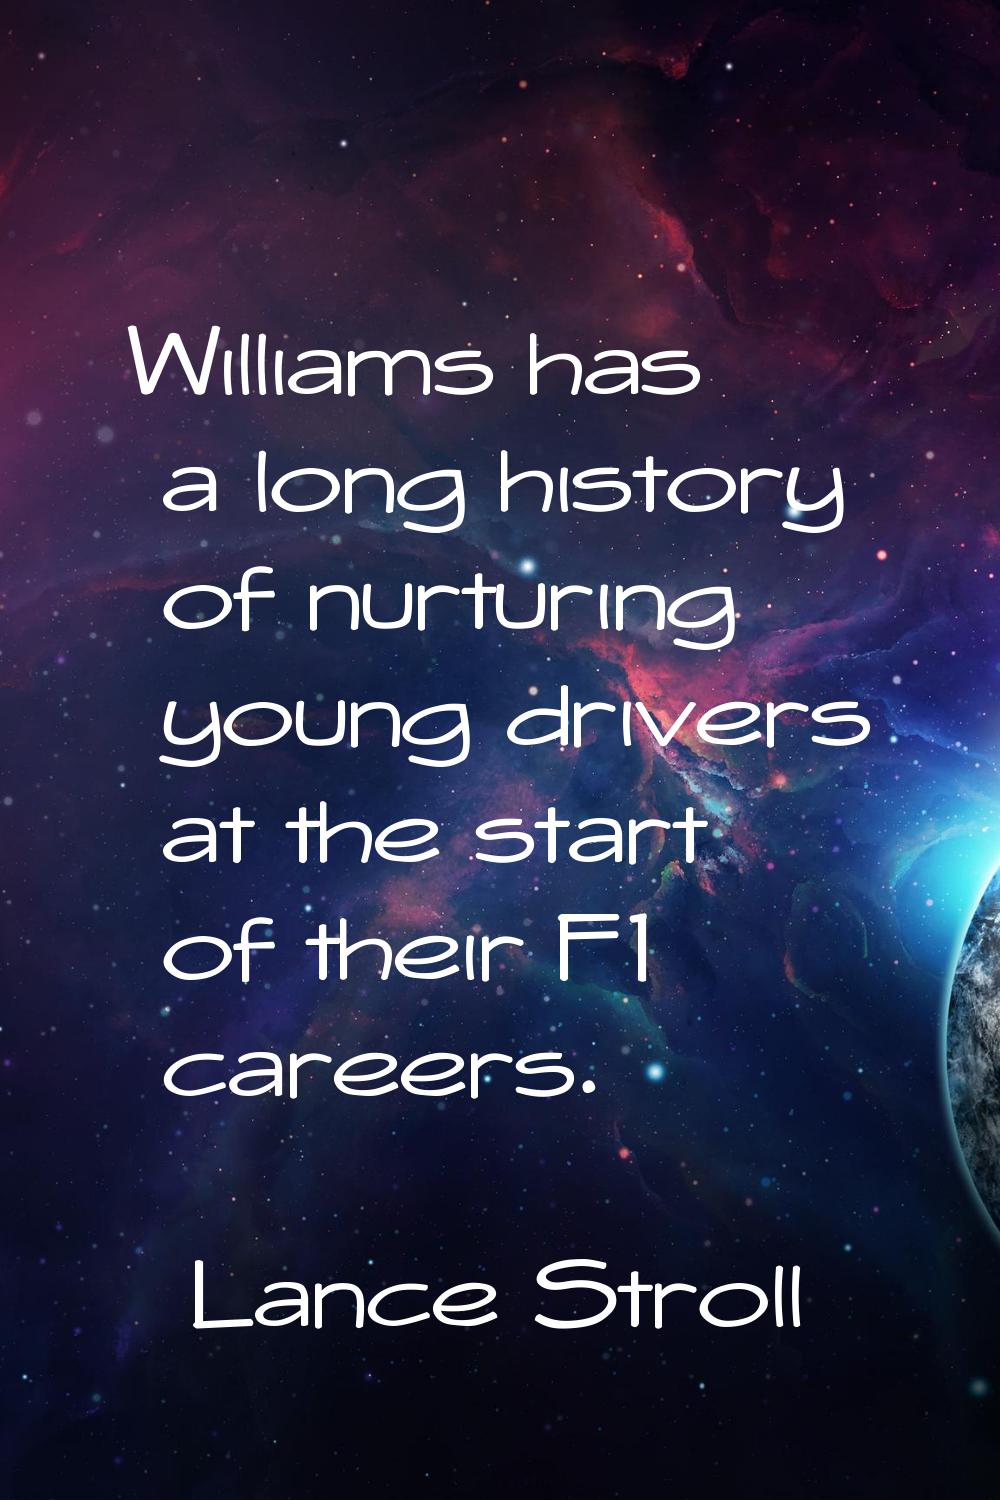 Williams has a long history of nurturing young drivers at the start of their F1 careers.